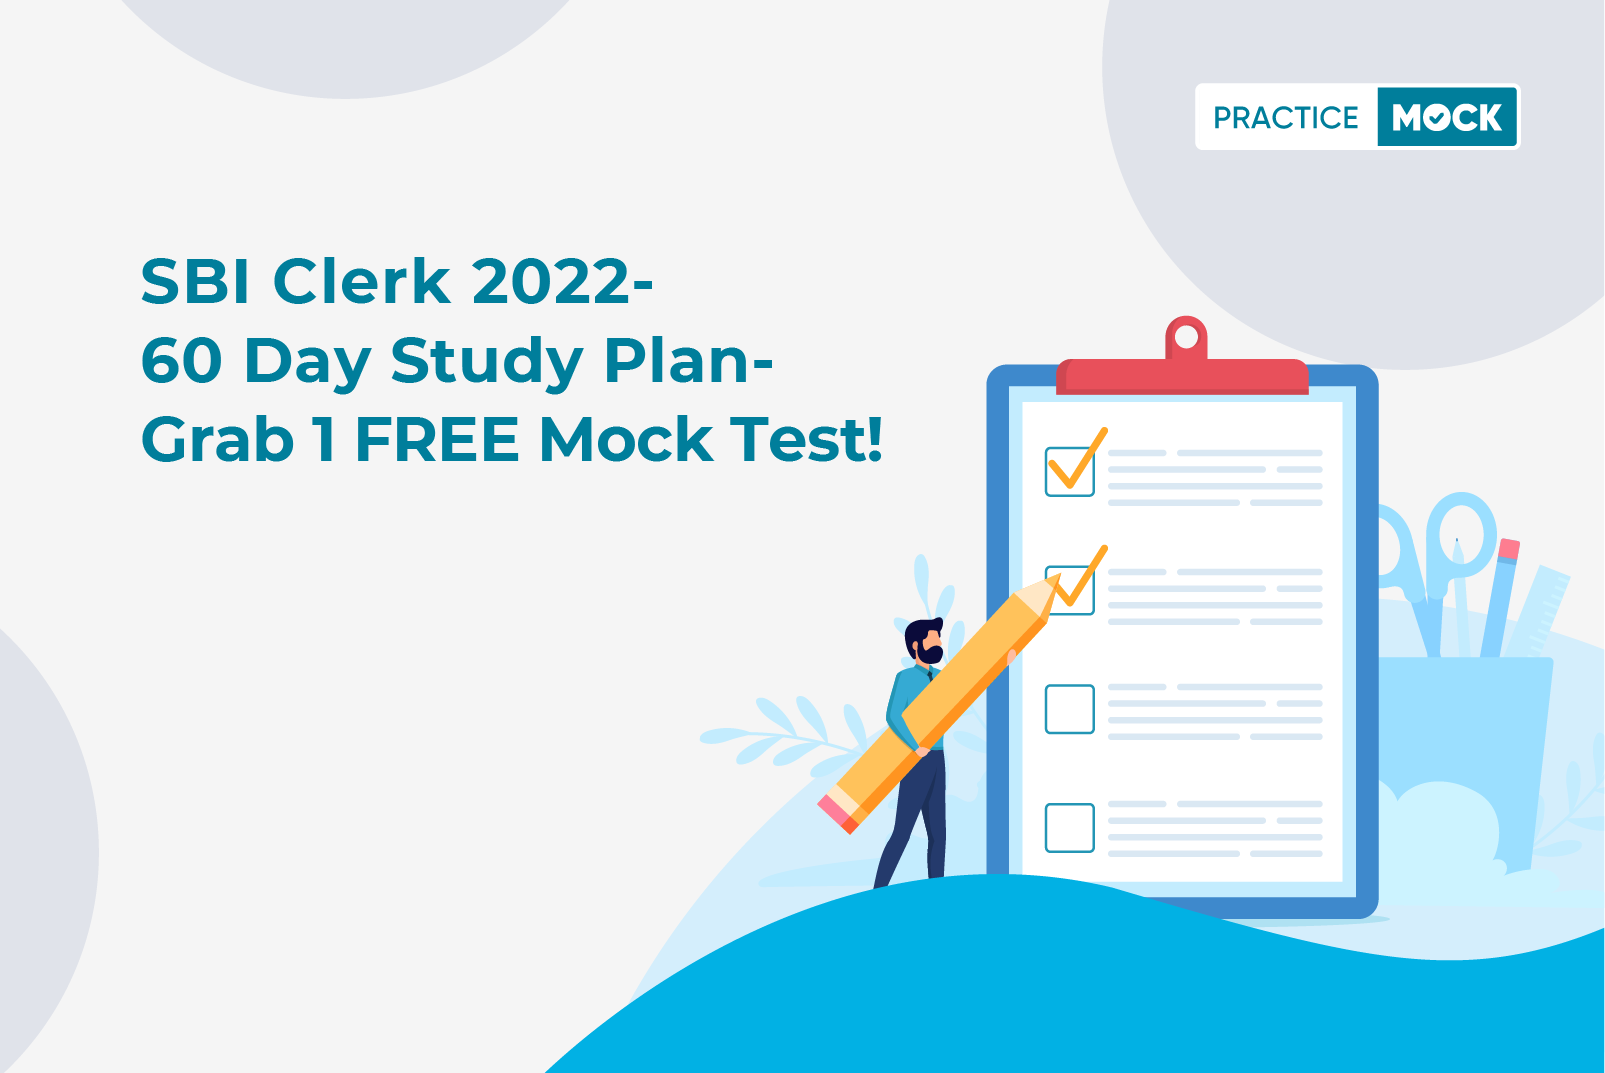 SBI Clerk 2022-60 Day Study Plan for Success with Latest Mock Tests